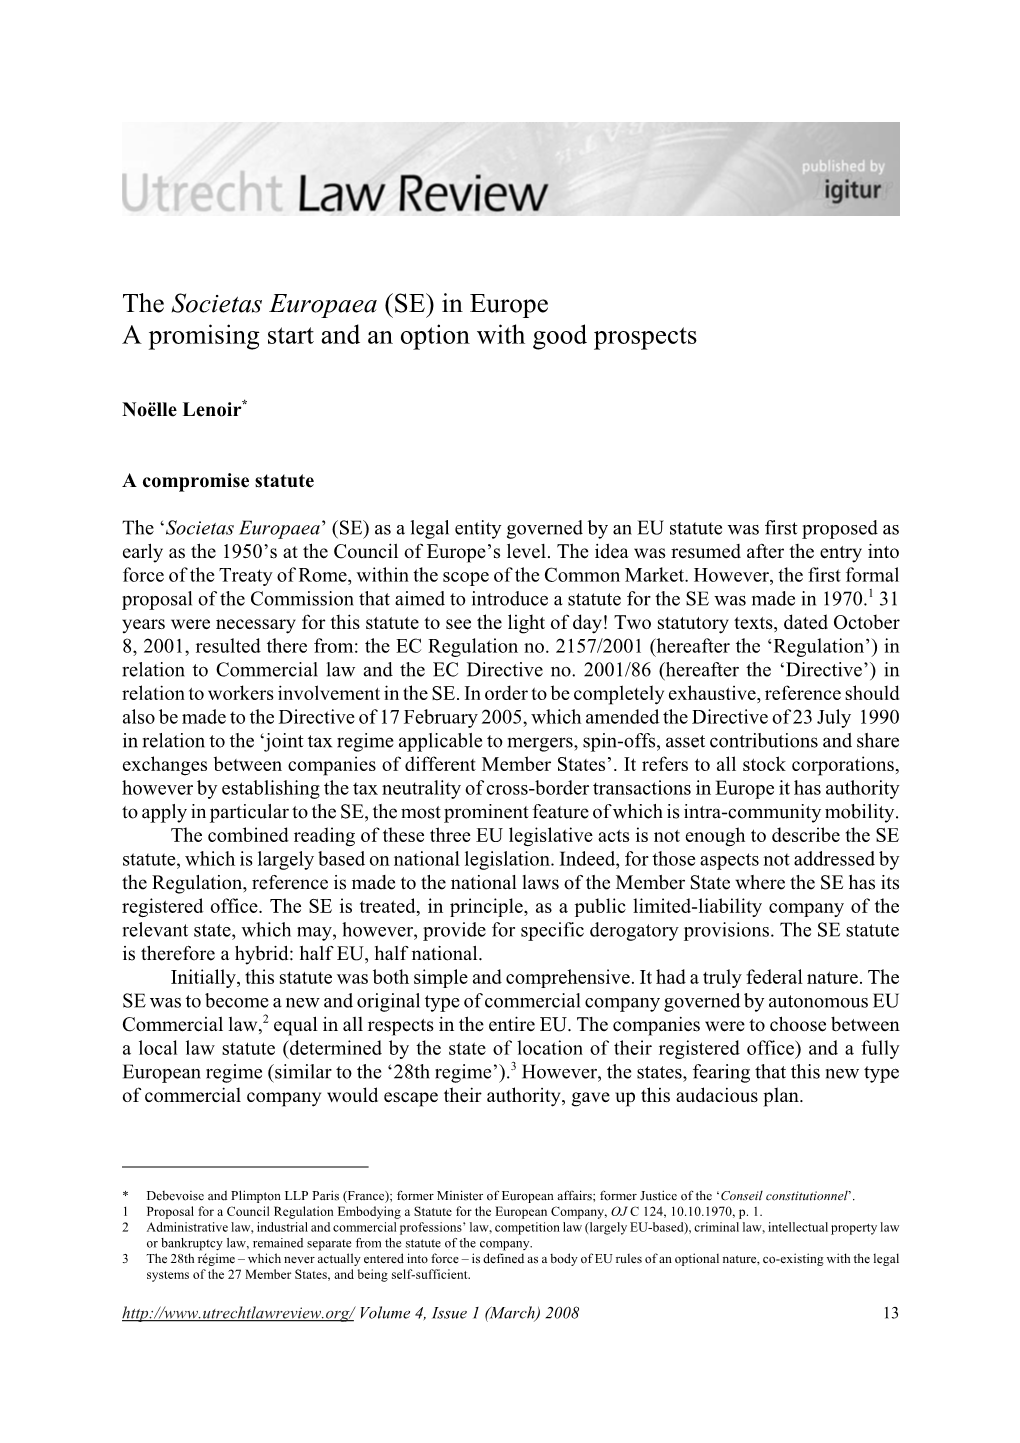 The Societas Europaea (SE) in Europe a Promising Start and an Option with Good Prospects